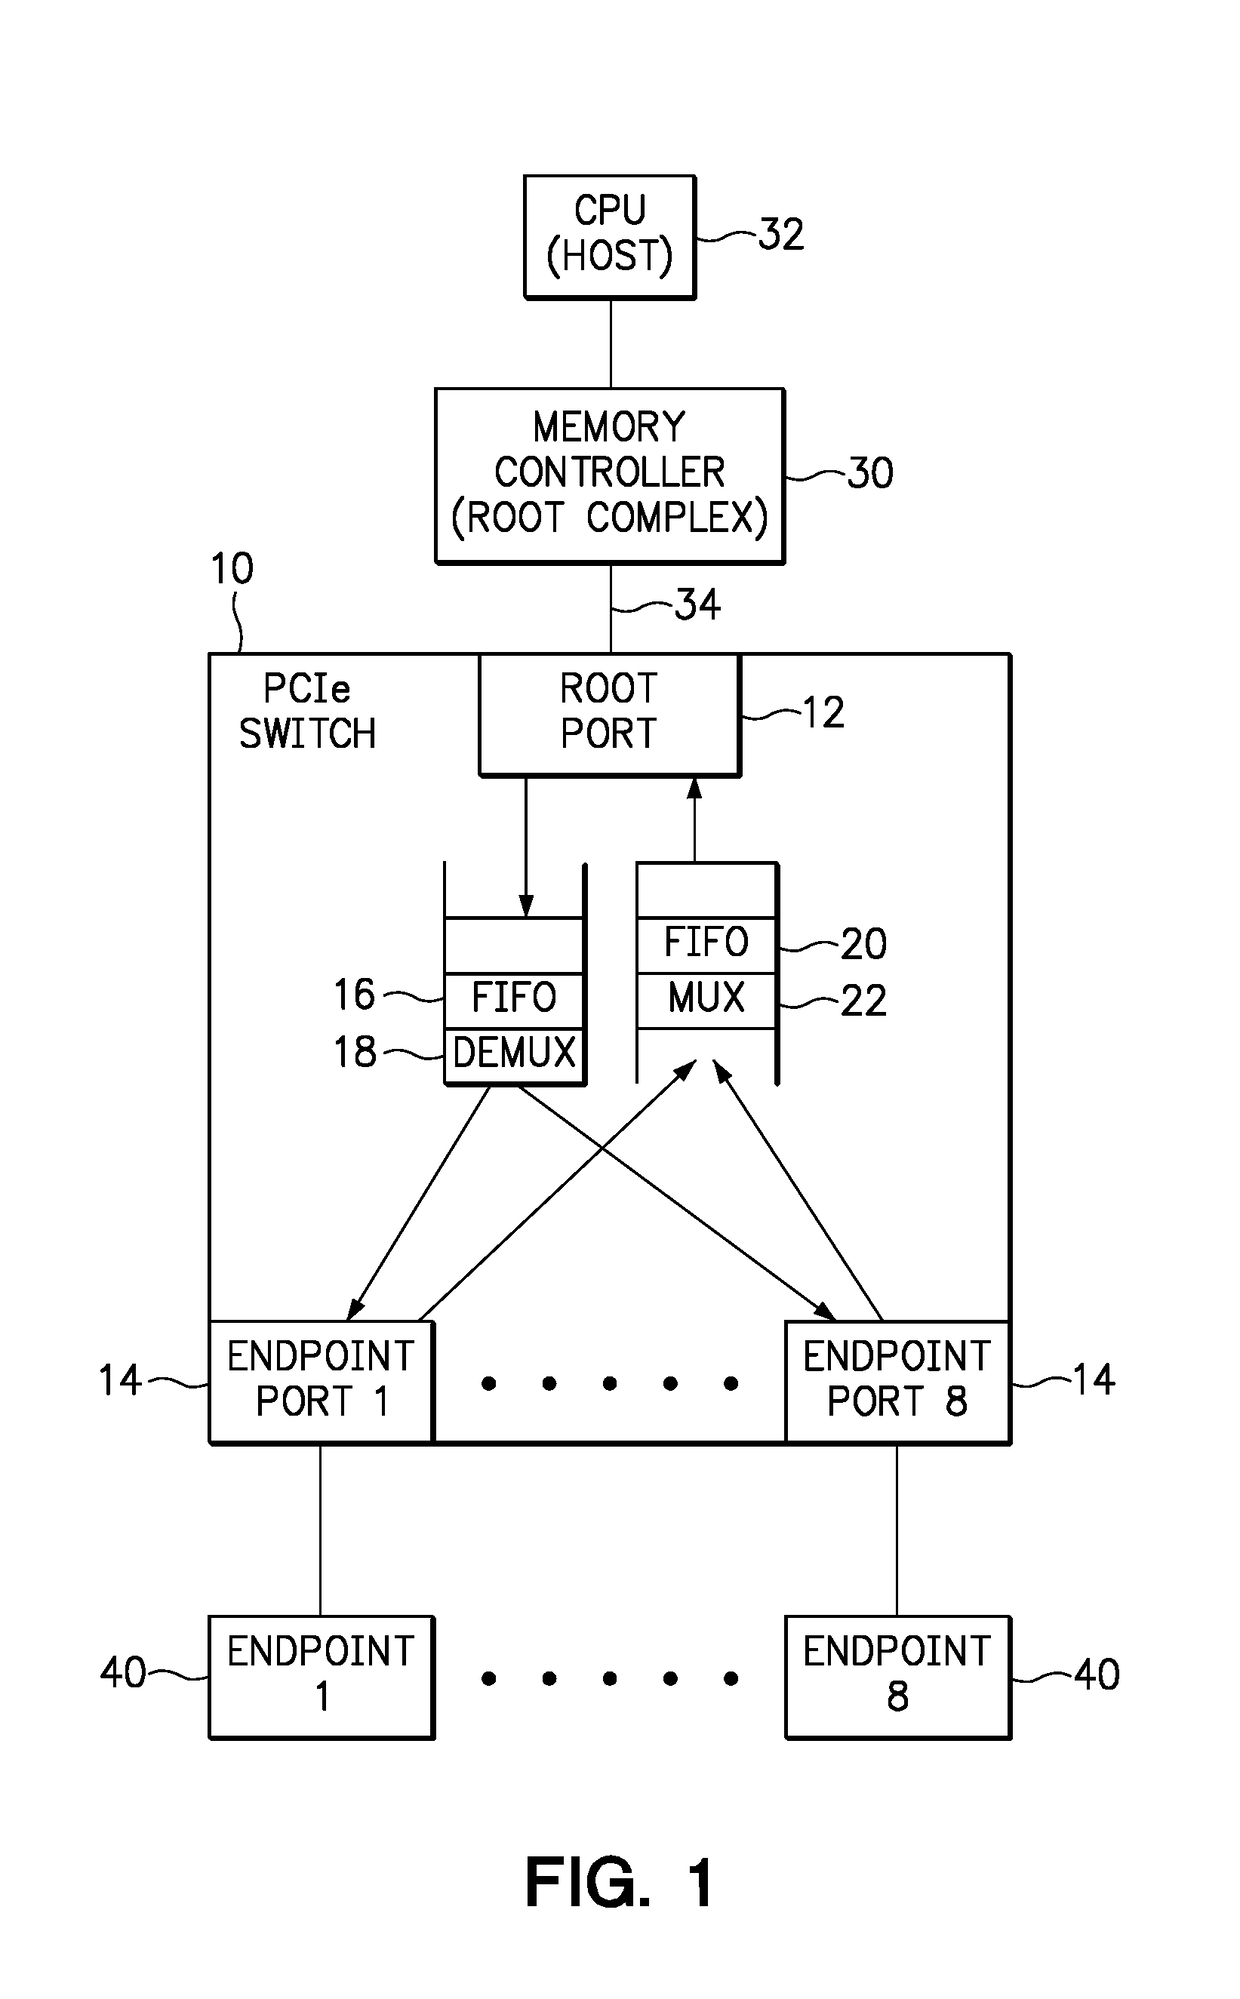 Pcie switch for aggregating a large number of endpoint devices